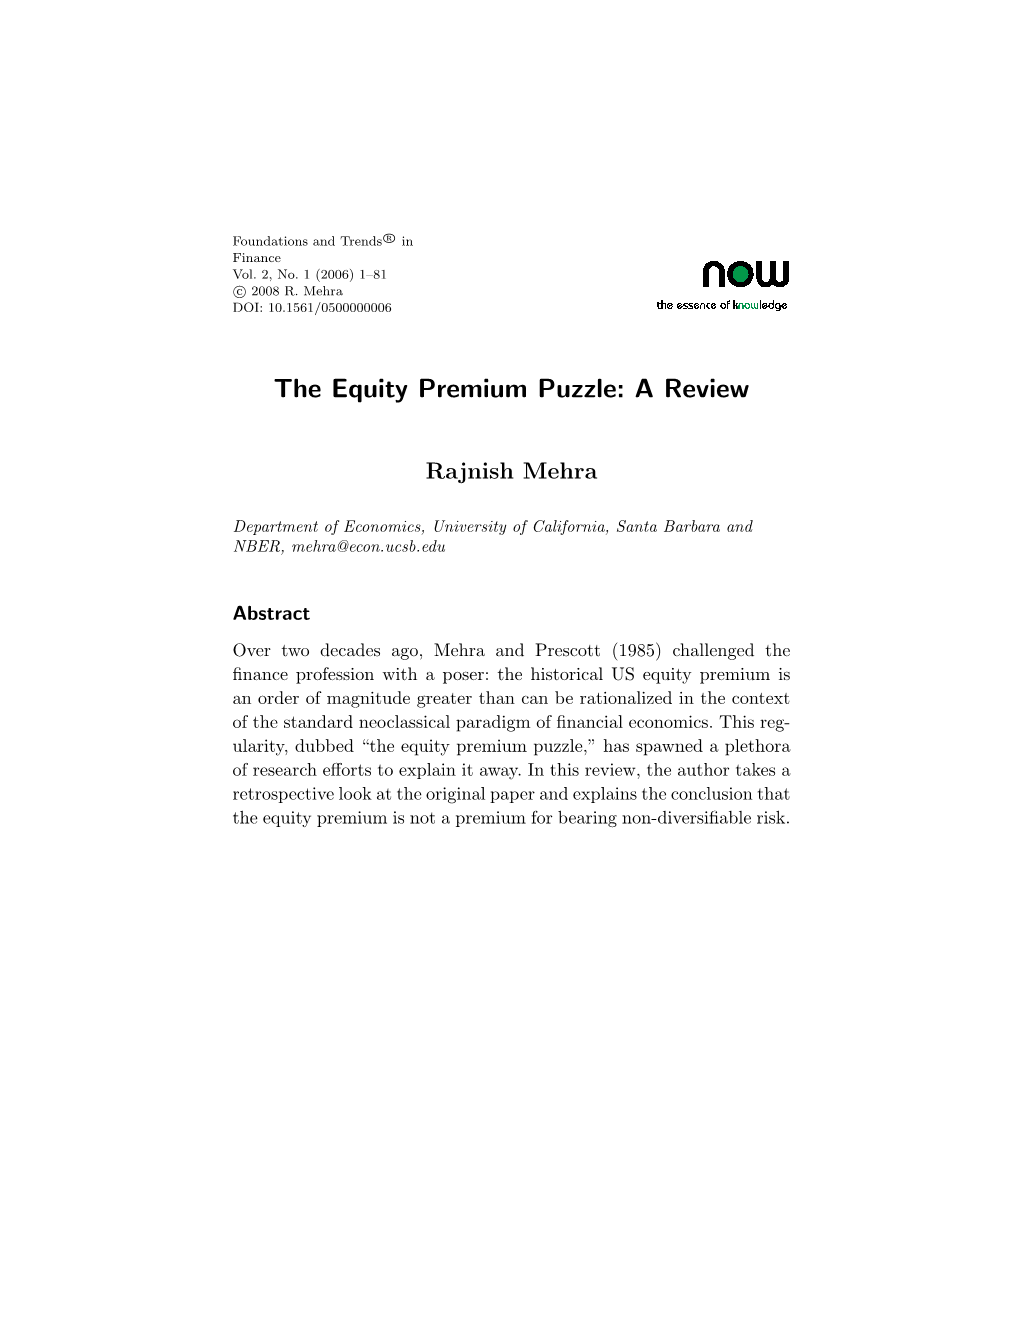 The Equity Premium Puzzle: a Review